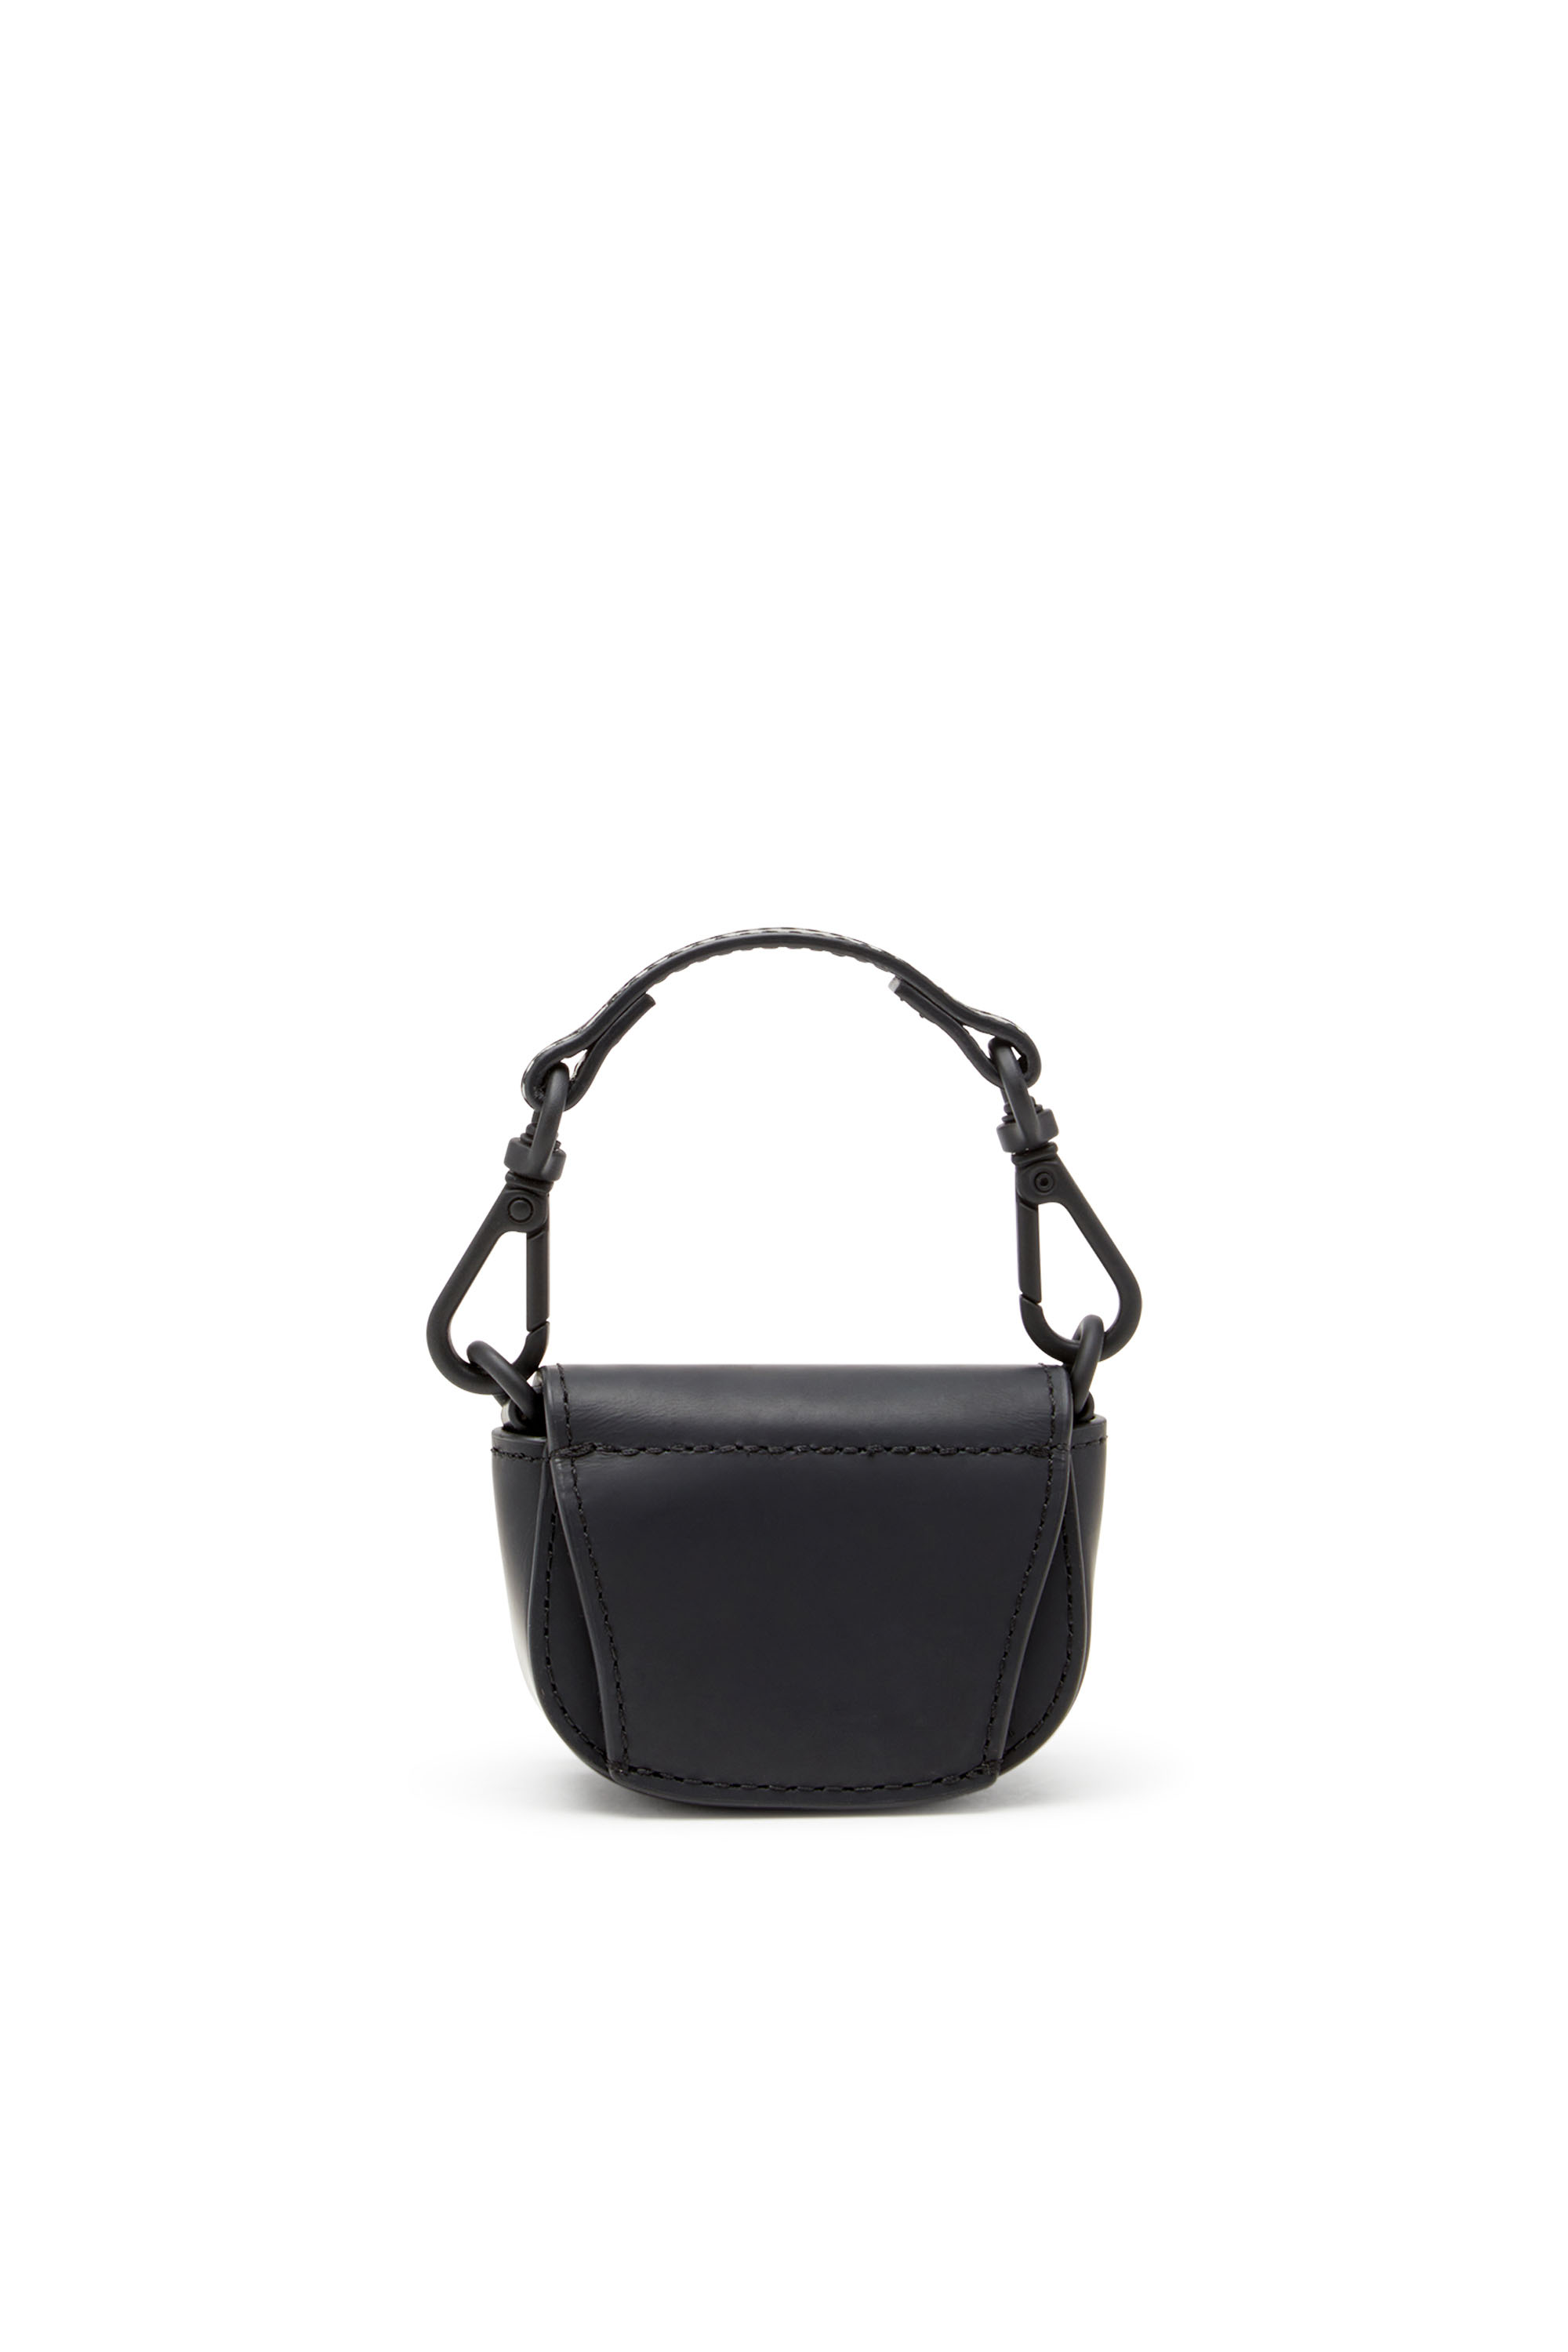 Women's Iconic micro bag charm in matte leather | Black | Diesel